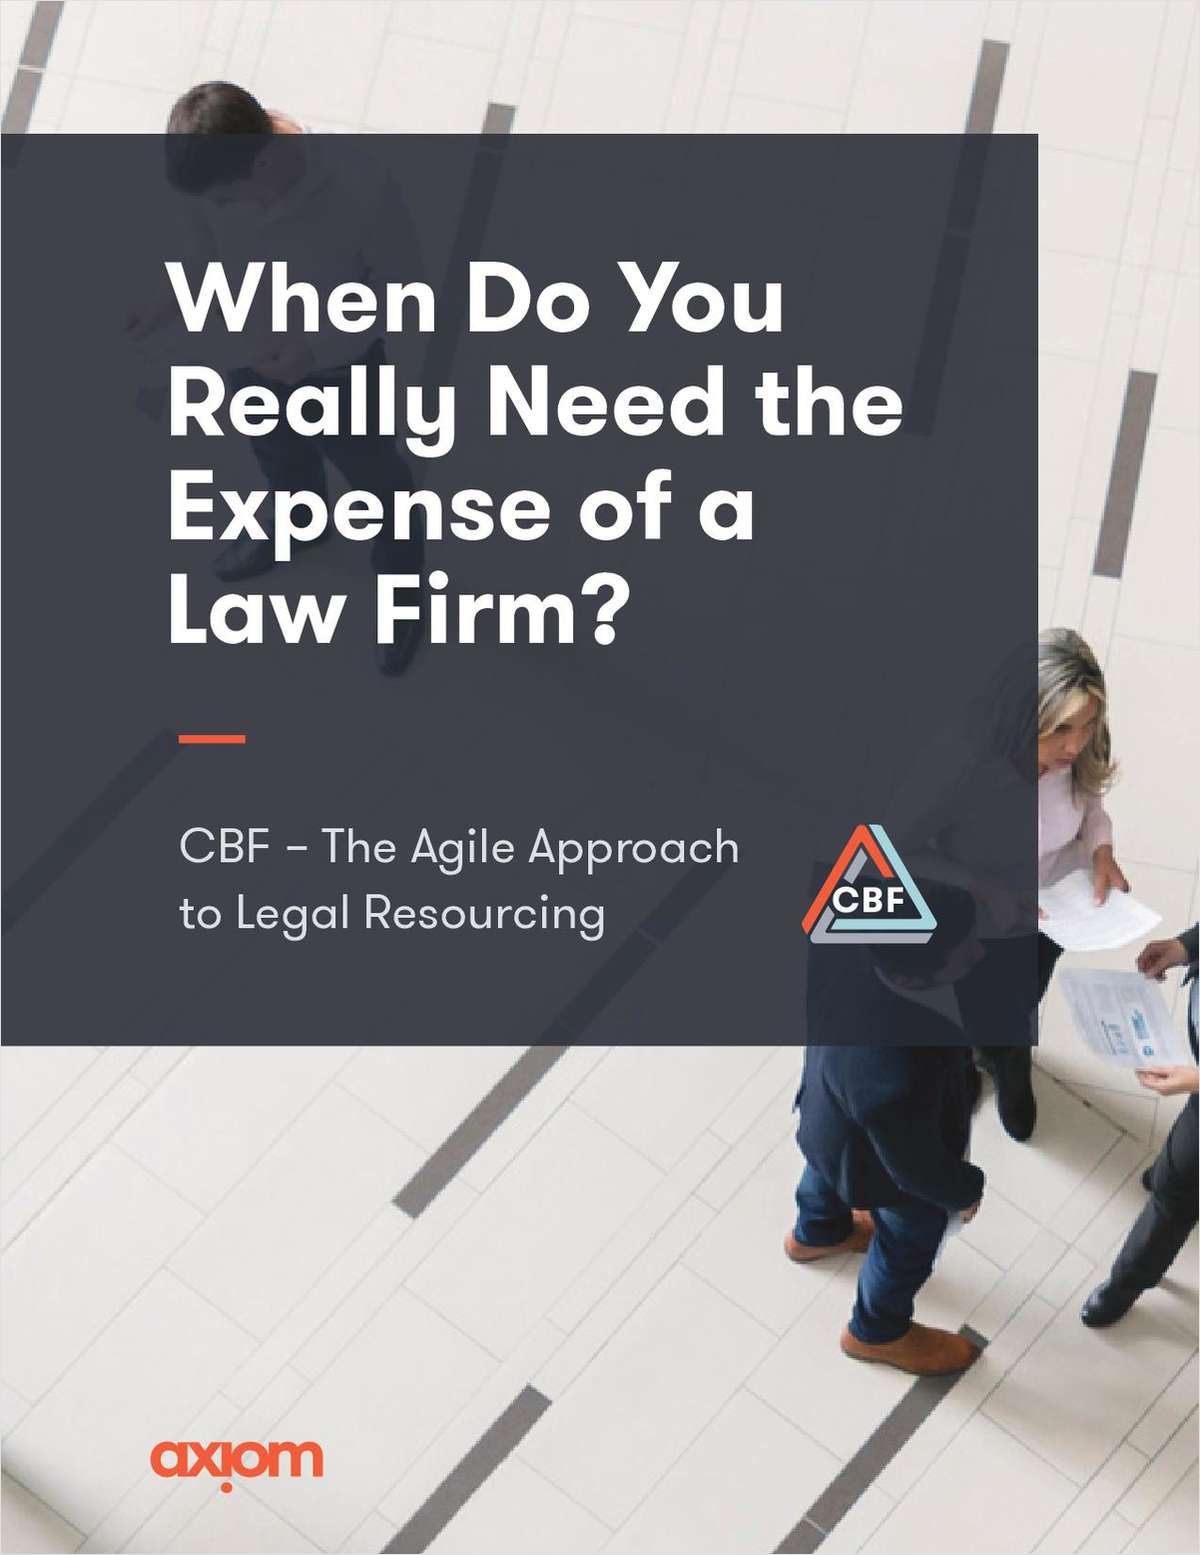 Download this ebook and learn how to improve risk mitigation, extend in-house expertise, decrease costs and reduce the burden on in-house counsel with a new model for processing legal matters that provides a mechanism for more finely focusing how and when external firms should be called upon for counsel.